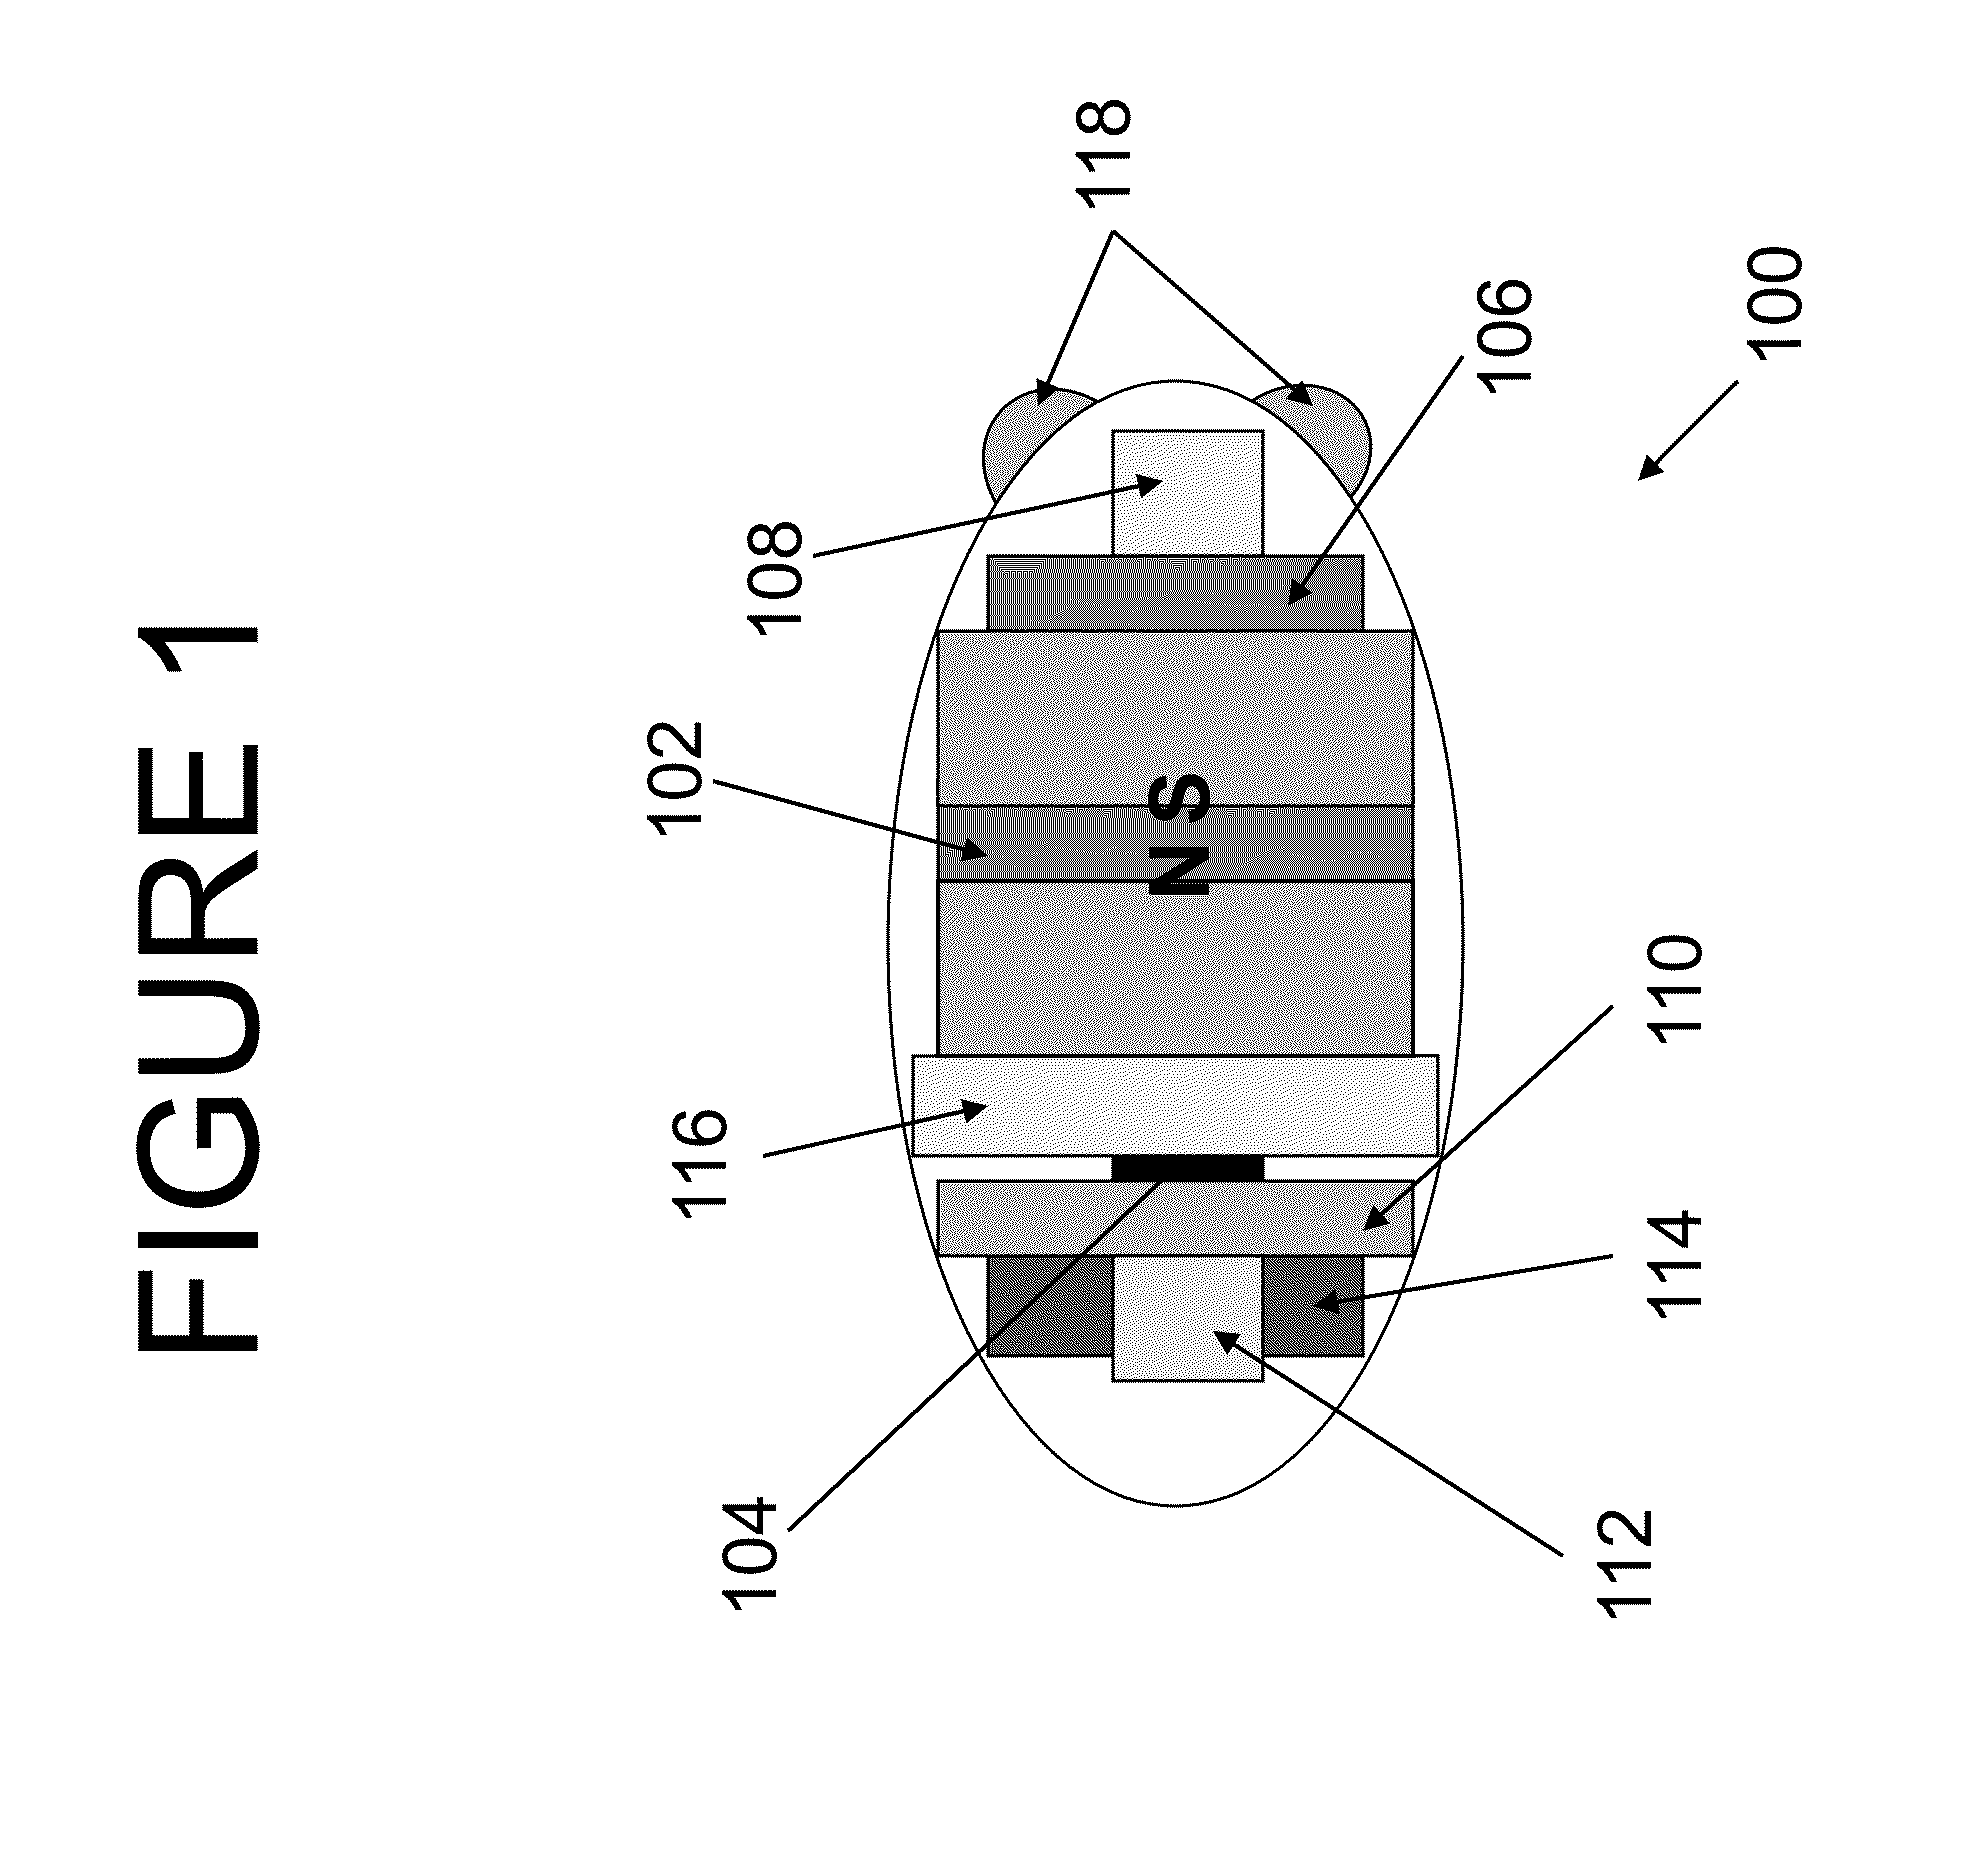 System and Method for Orientation and Movement of Remote Objects